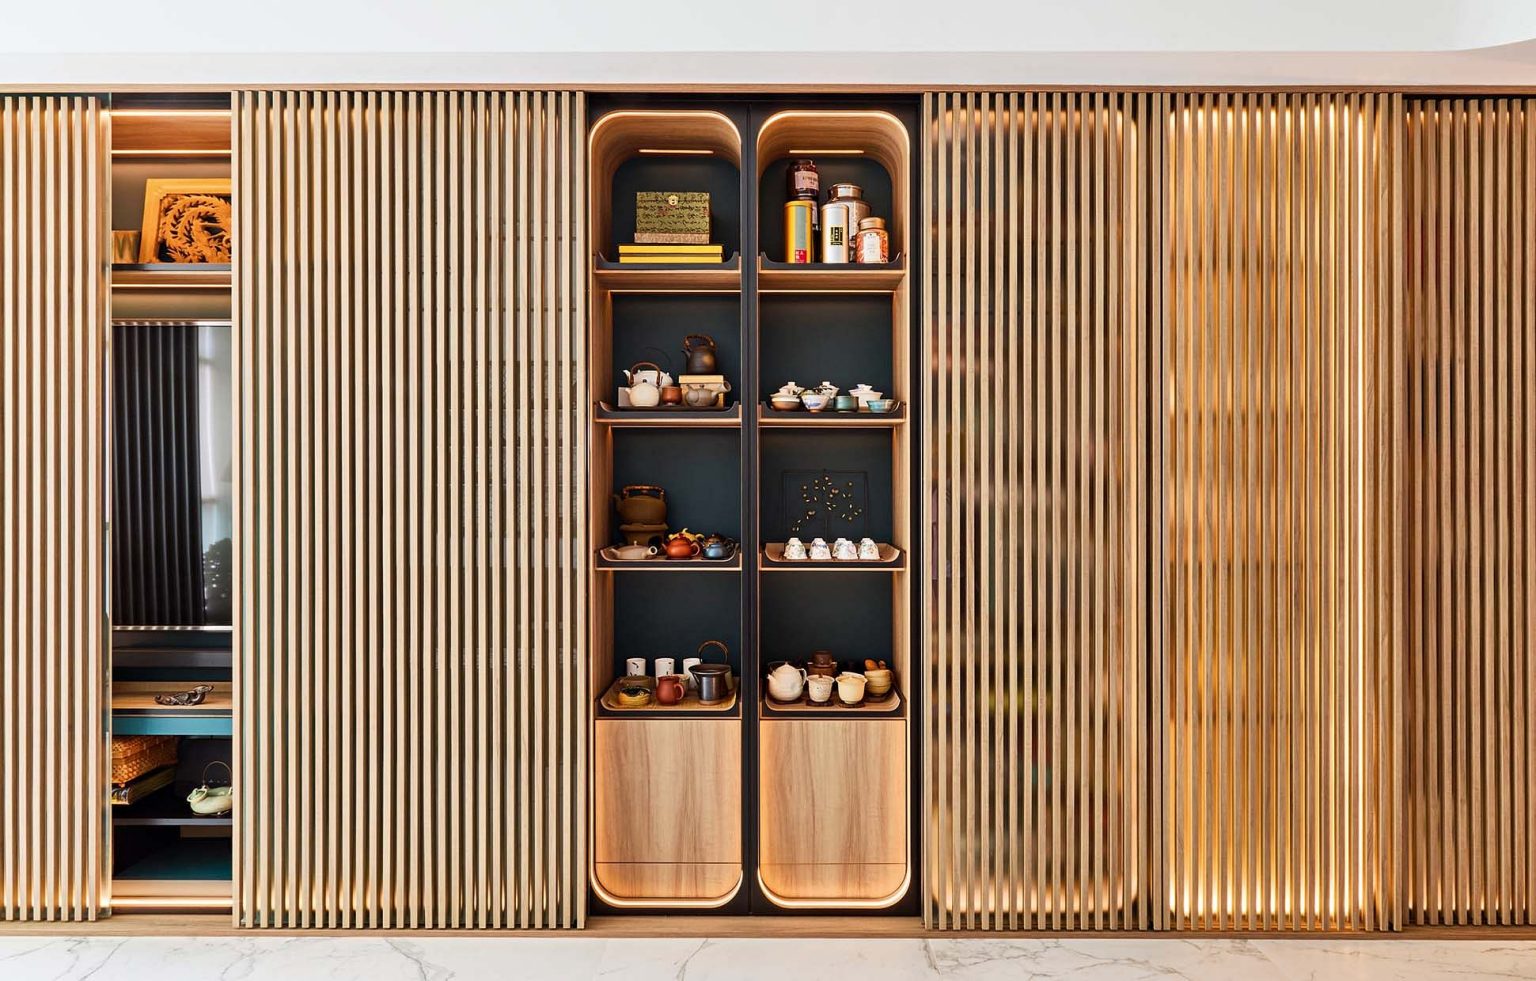 Subtly lit sliding screens help to conceal extra shelving to create a streamlined look.